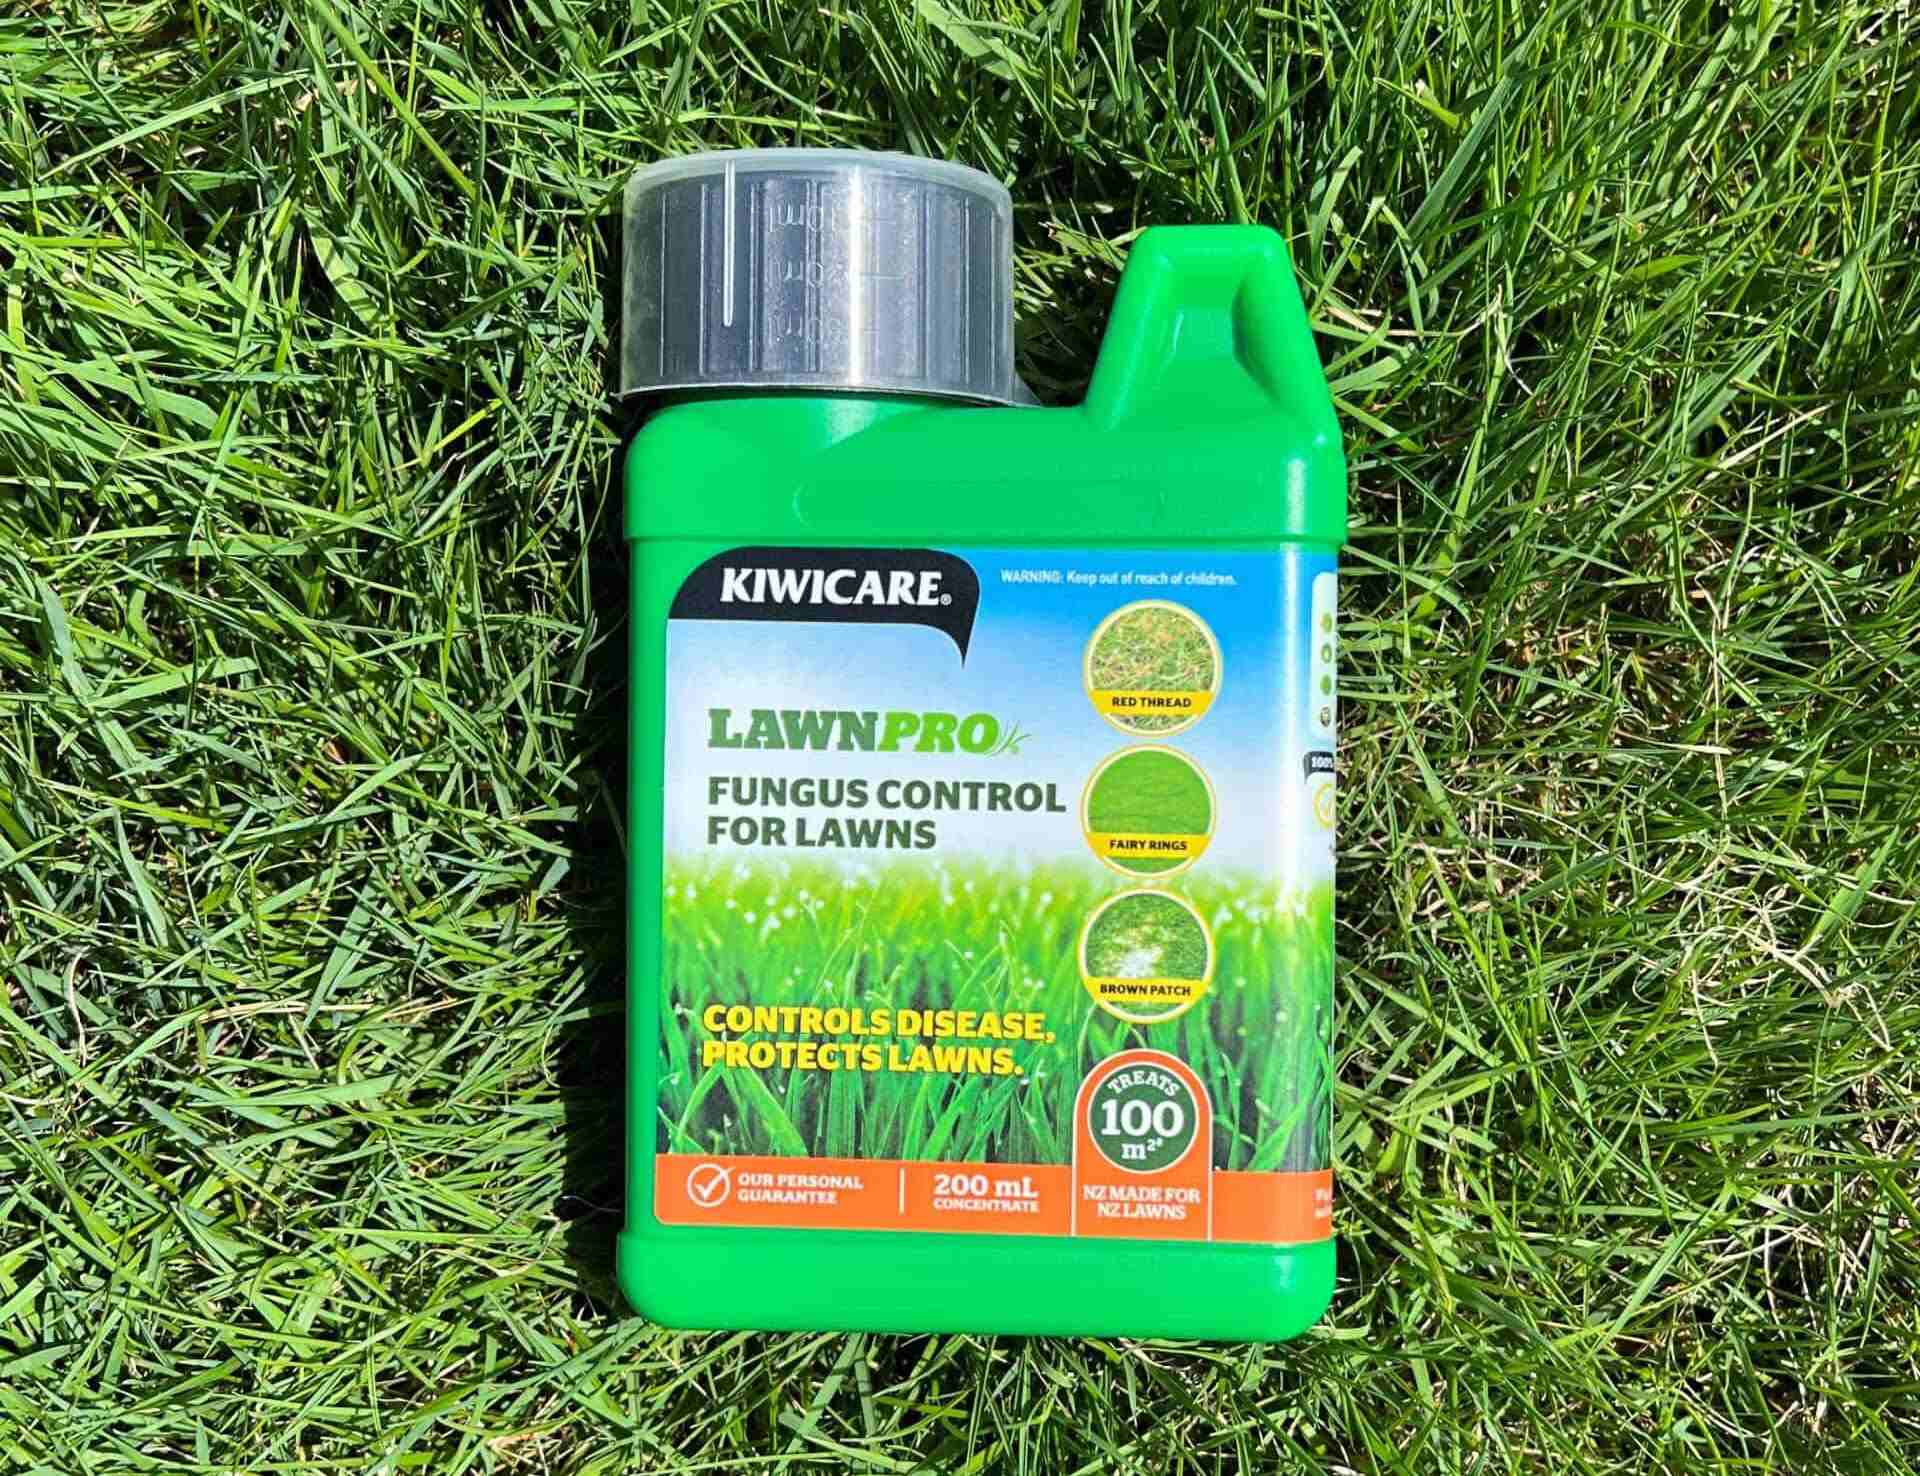 When To Apply Fungus Control For Lawns